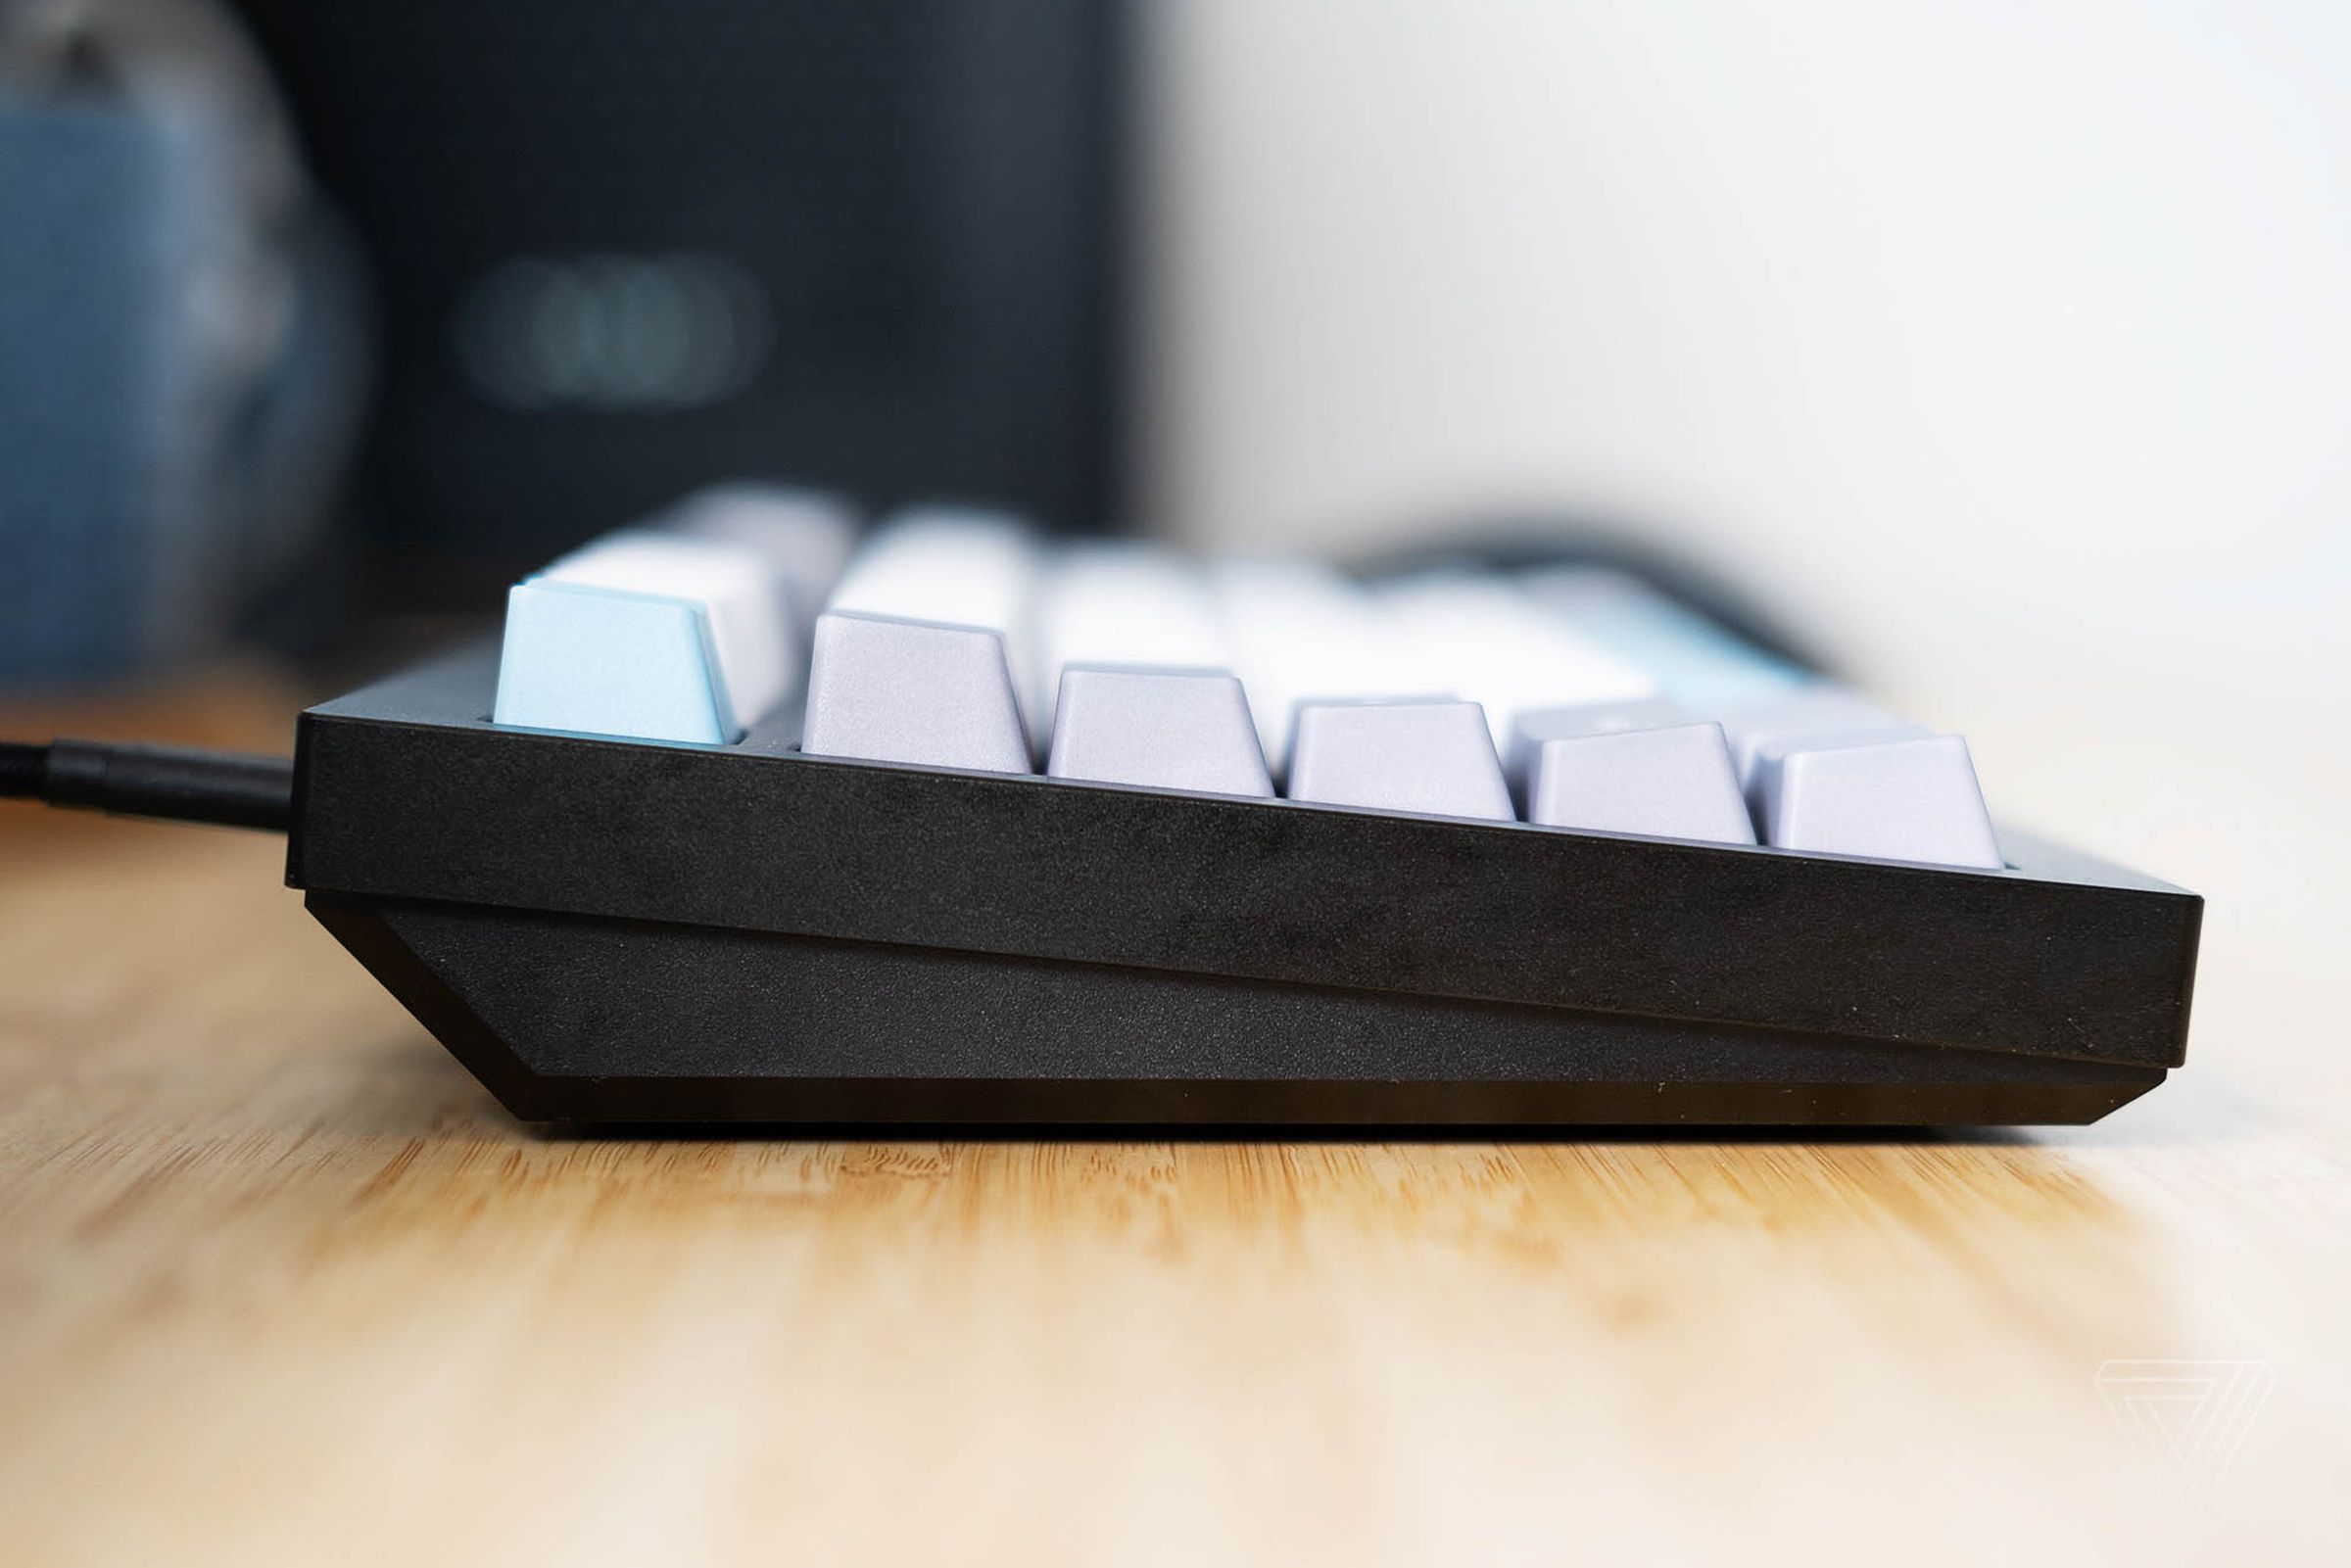 A solid aluminum case with no height adjust.